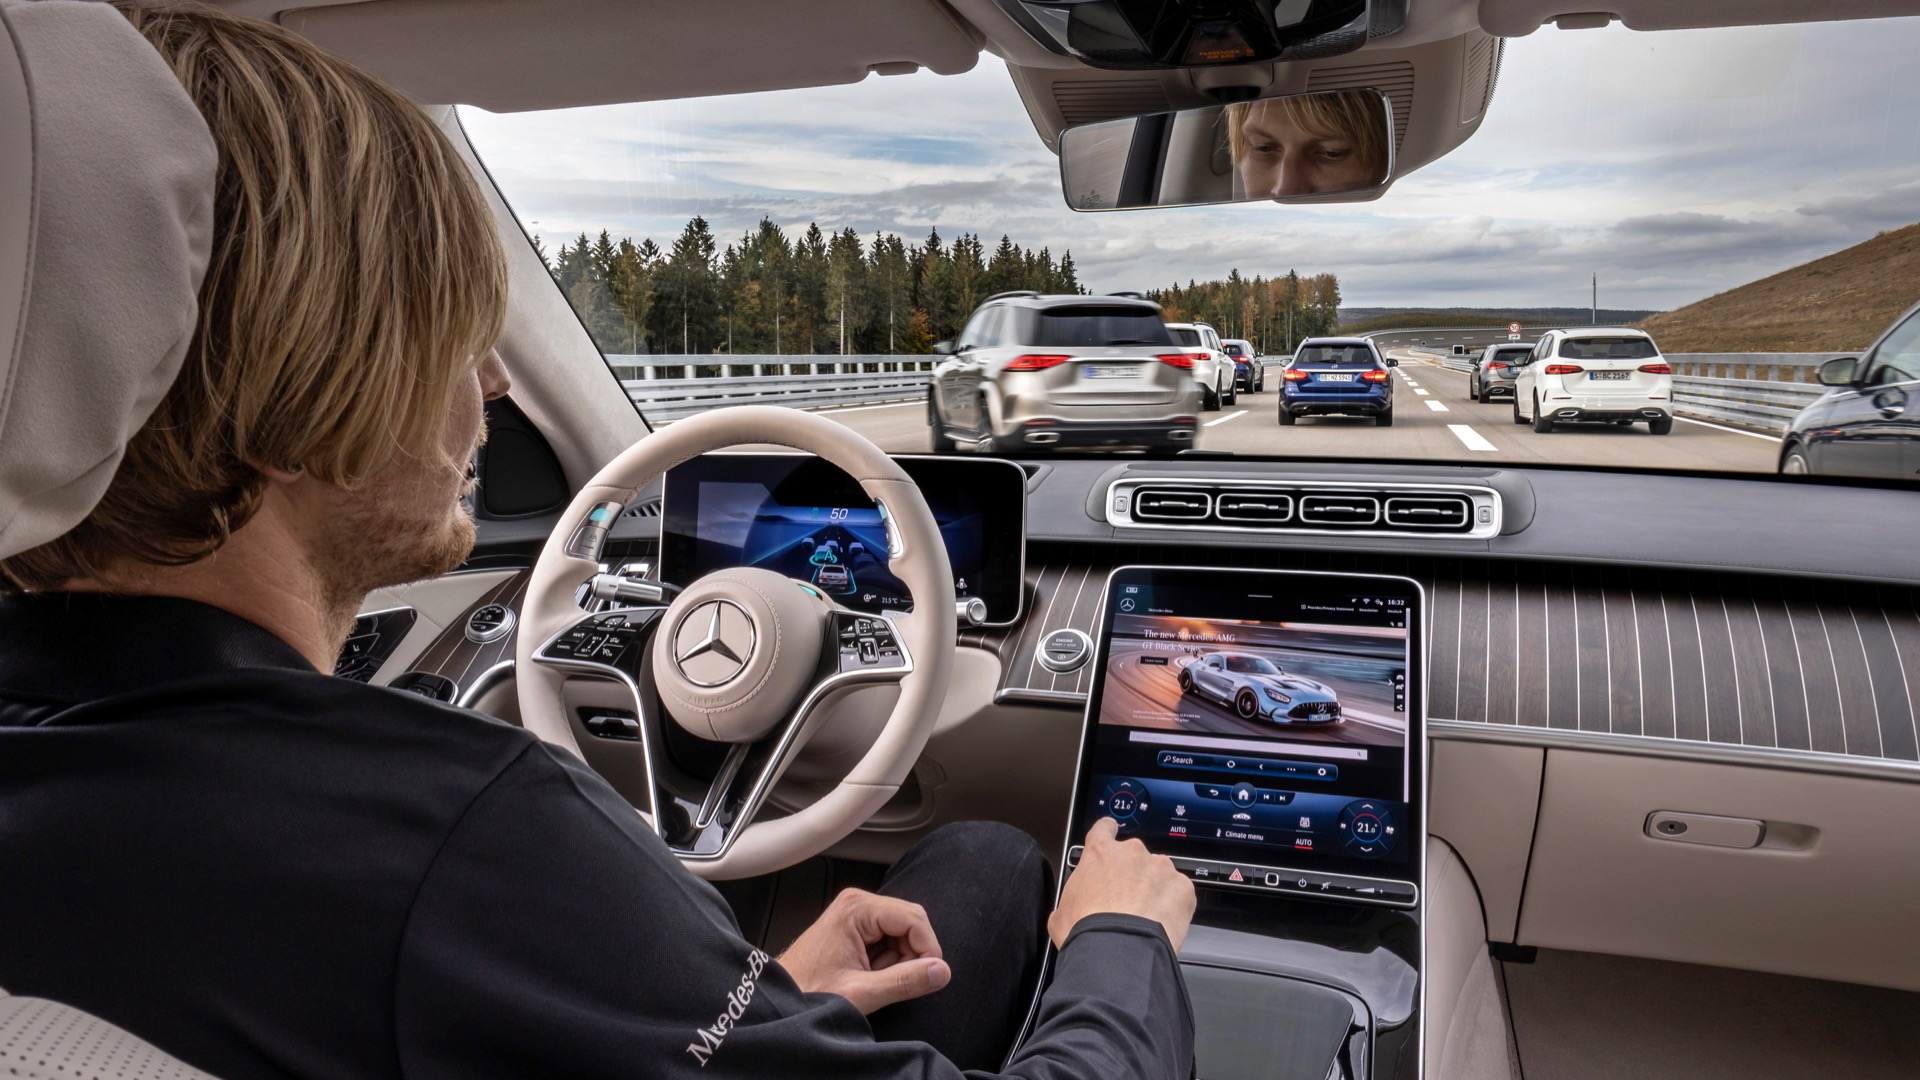 Mercedes-Benz to launch Level 3 self-driving system in 2022 after gaining  regulatory approval